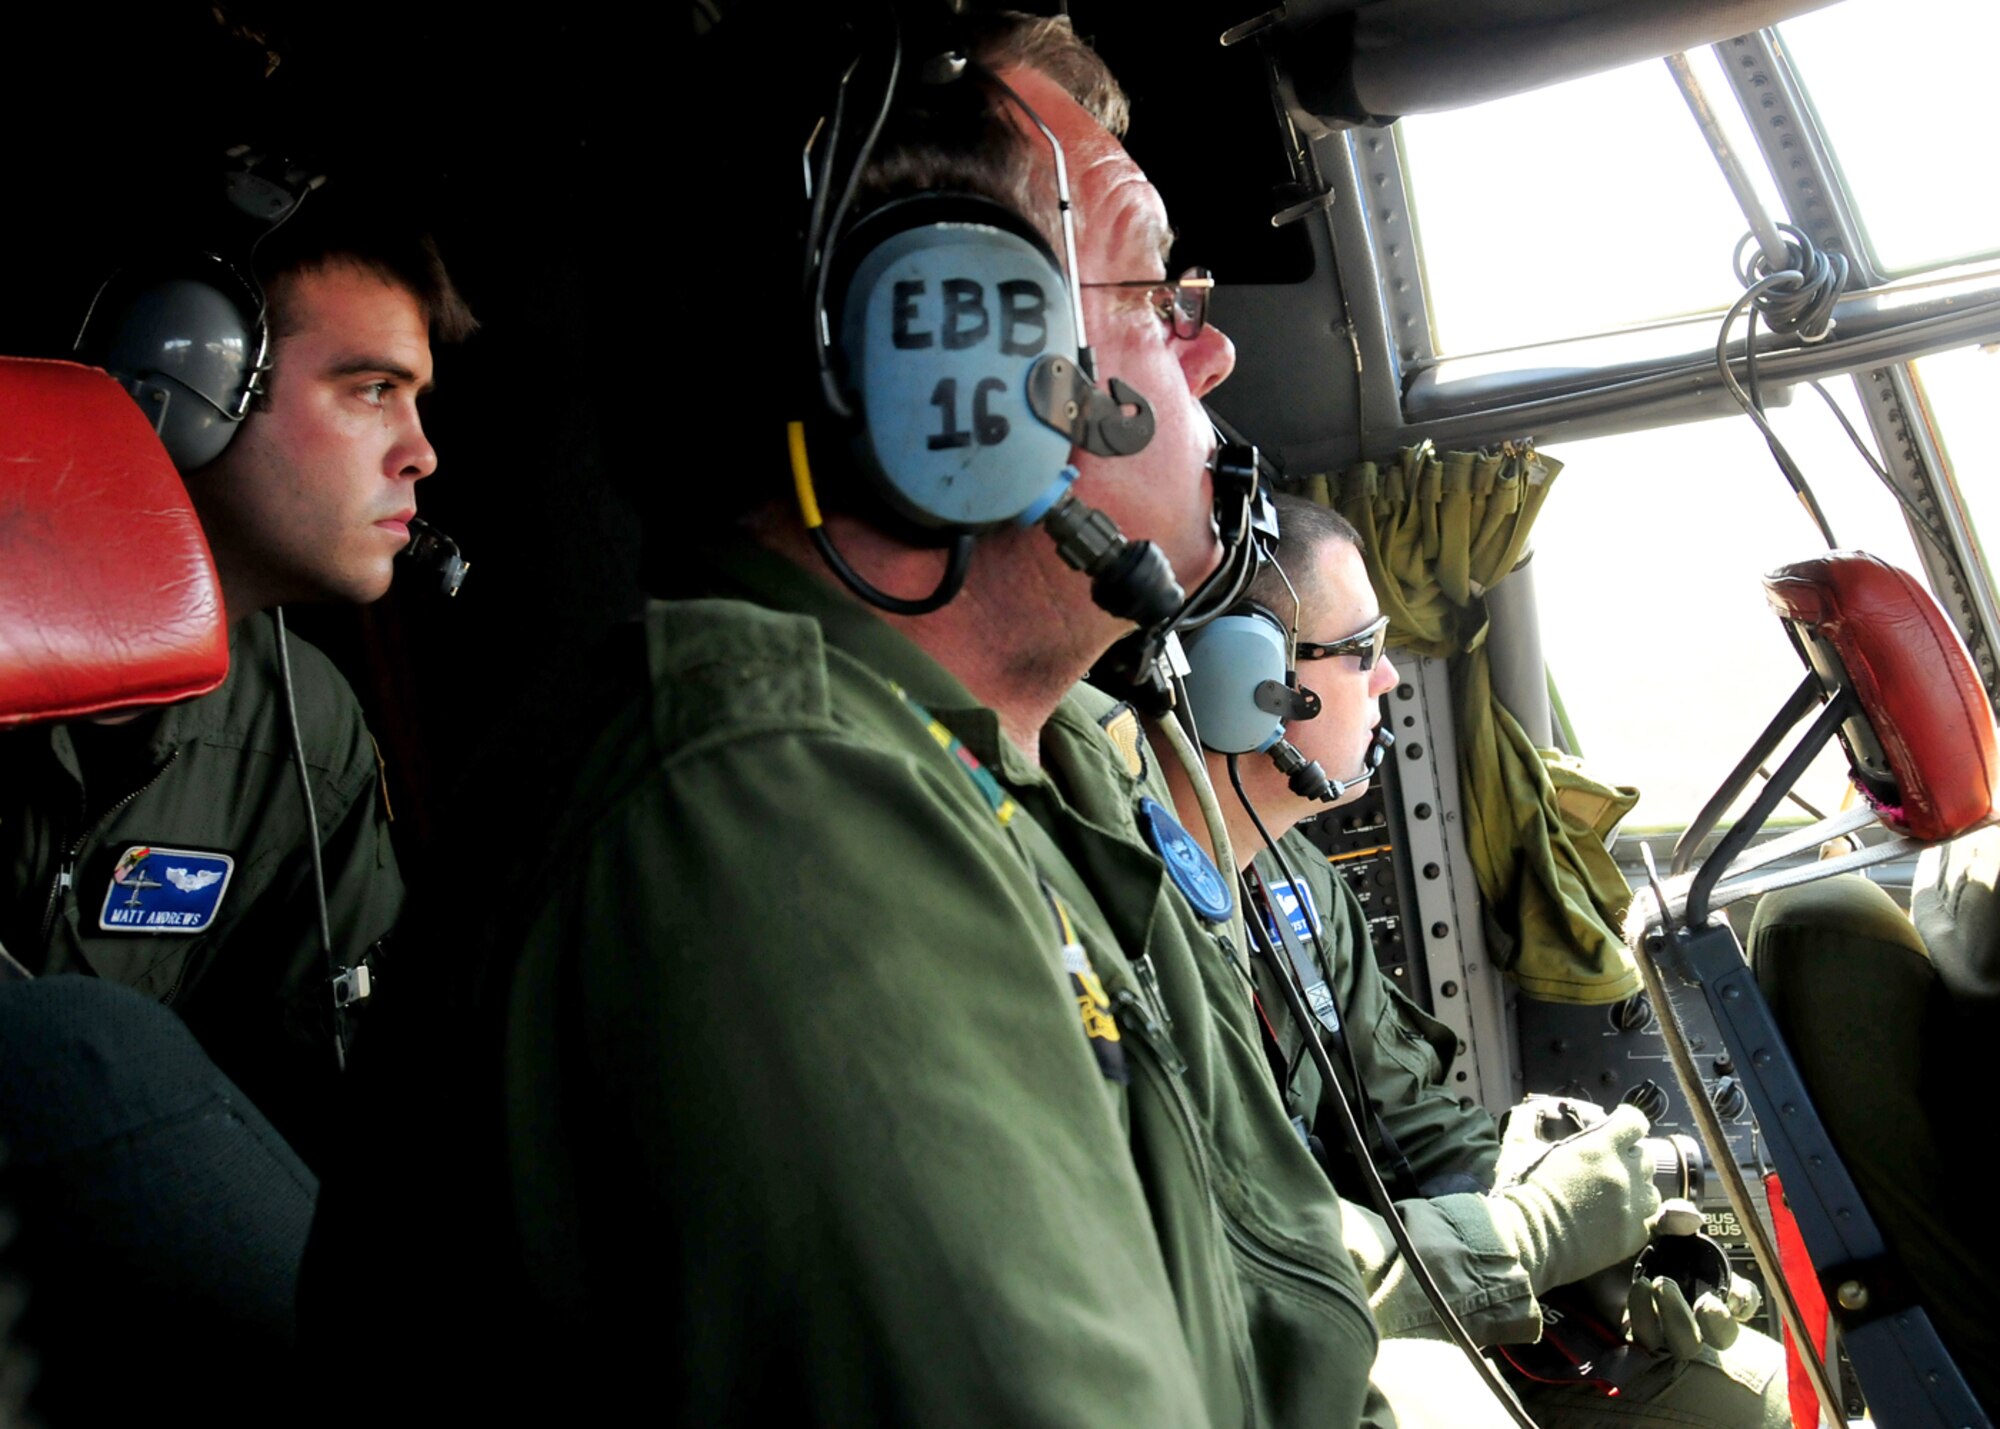 United States Air Force Capt. Matt Andrews (left), 37th Airlift Squadron C-130 pilot, and Lt. Col. Mark August (right), 37th AS commander, both from Ramstein Air Base, Germany, check out the cockpit of a South African C-130 during a familiarization flight, Sept. 22, 2008. (U.S. Air Force photo by Staff Sgt. Markus Maier)(Release)